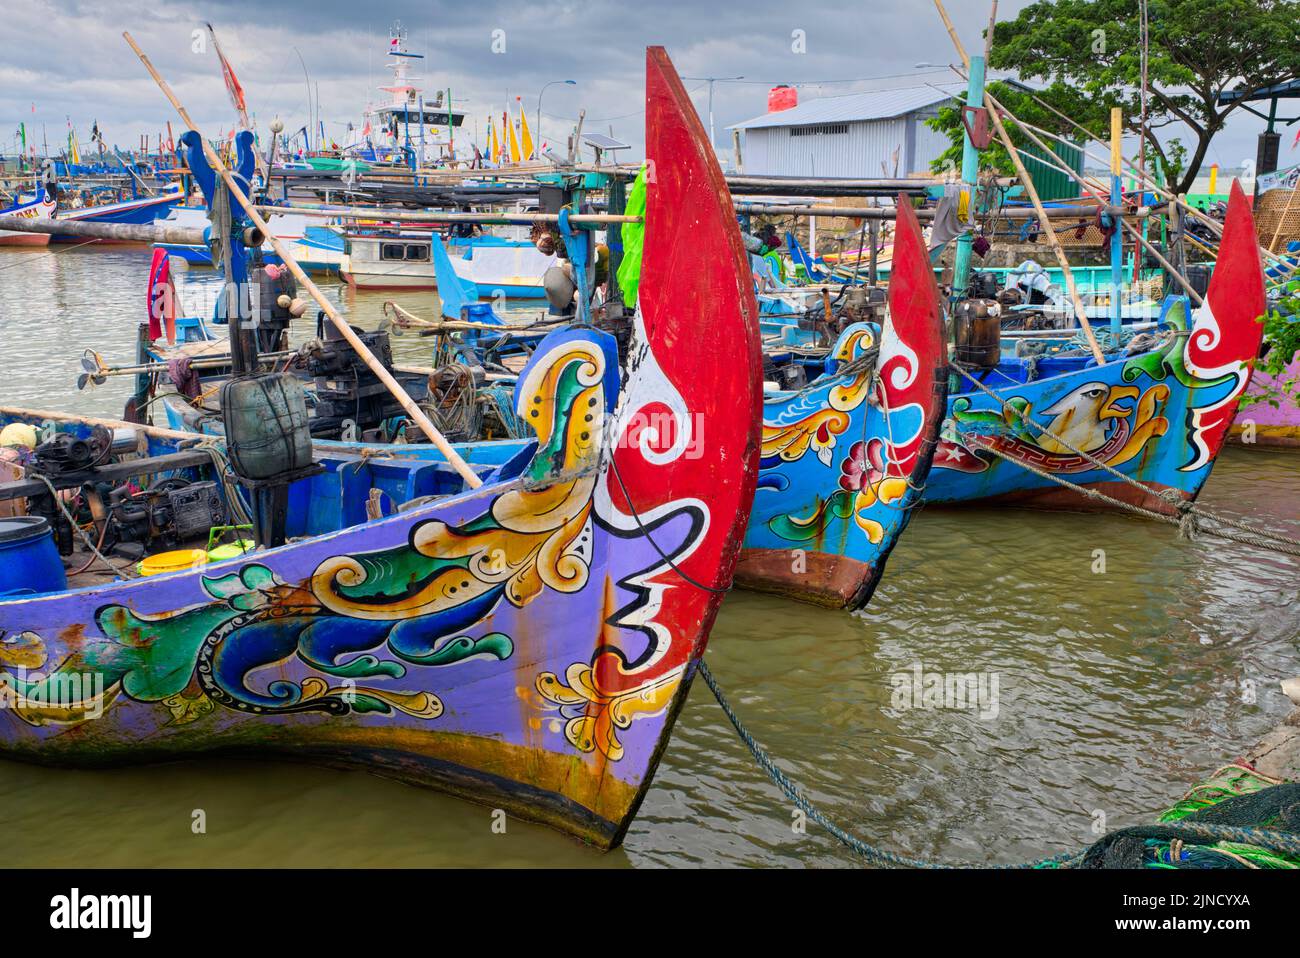 Almost all fishing boats are painted with colorful floral motifs on the front, while on the hull of the boat the name of the boat is written.  Taken @ Stock Photo